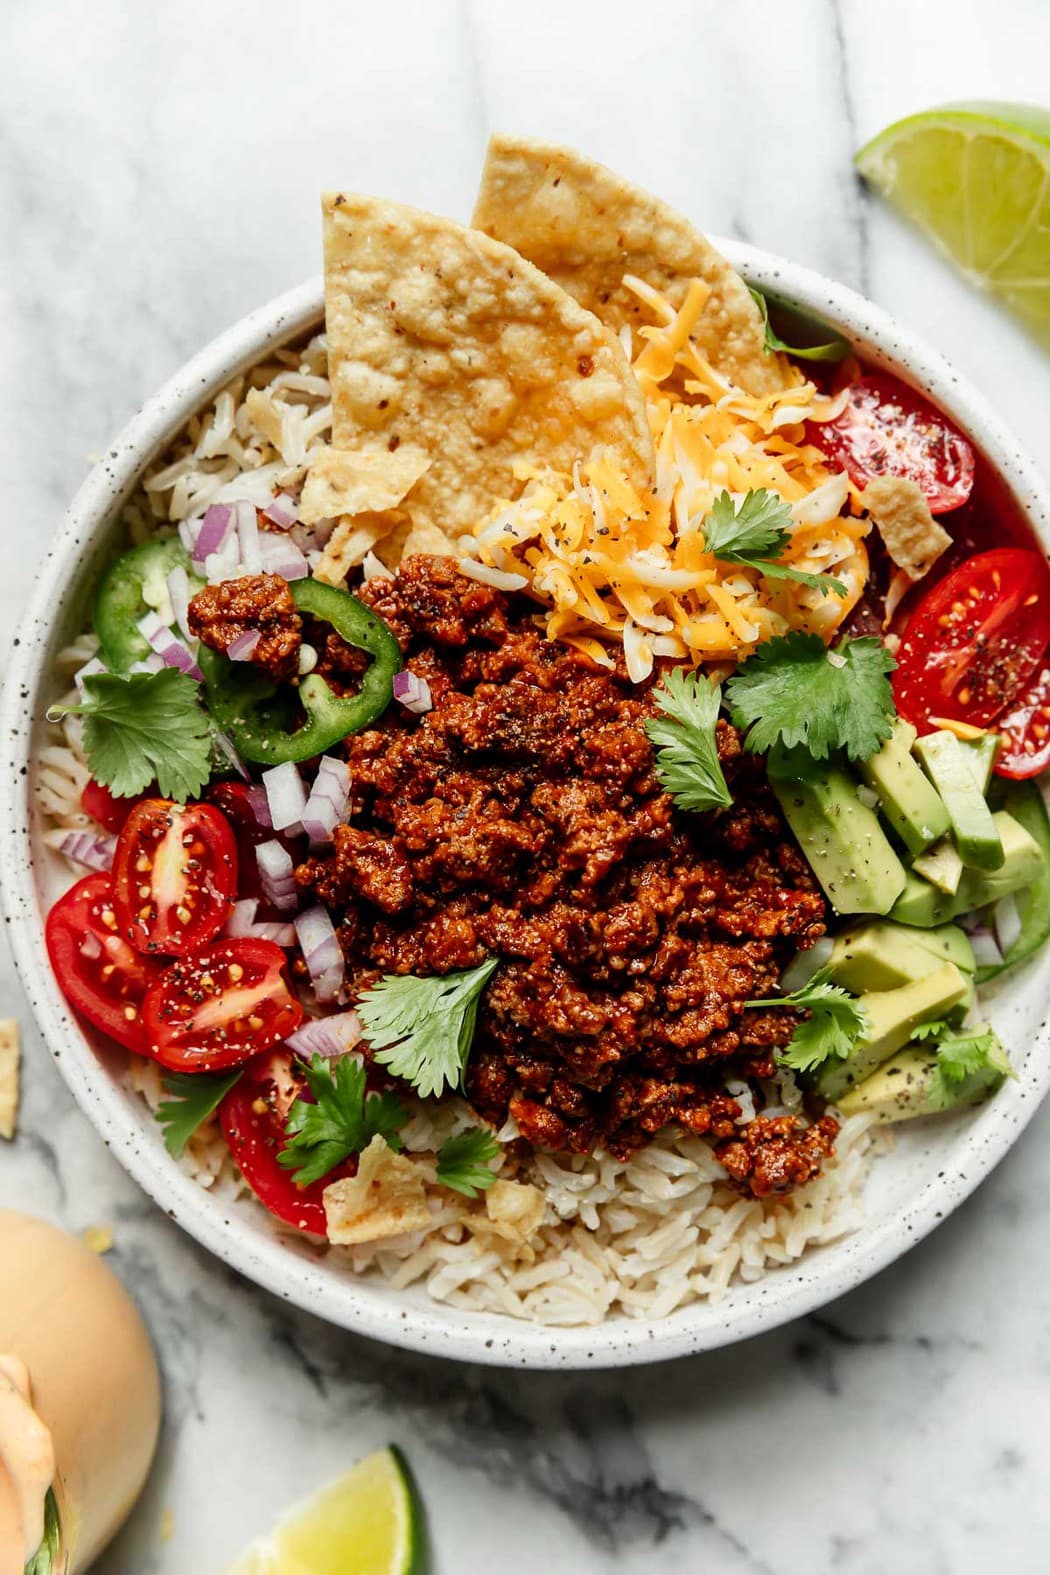 https://therealfooddietitians.com/wp-content/uploads/2021/08/Easy-Beef-Taco-Bowls-with-Salsa-Ranch-4.jpg